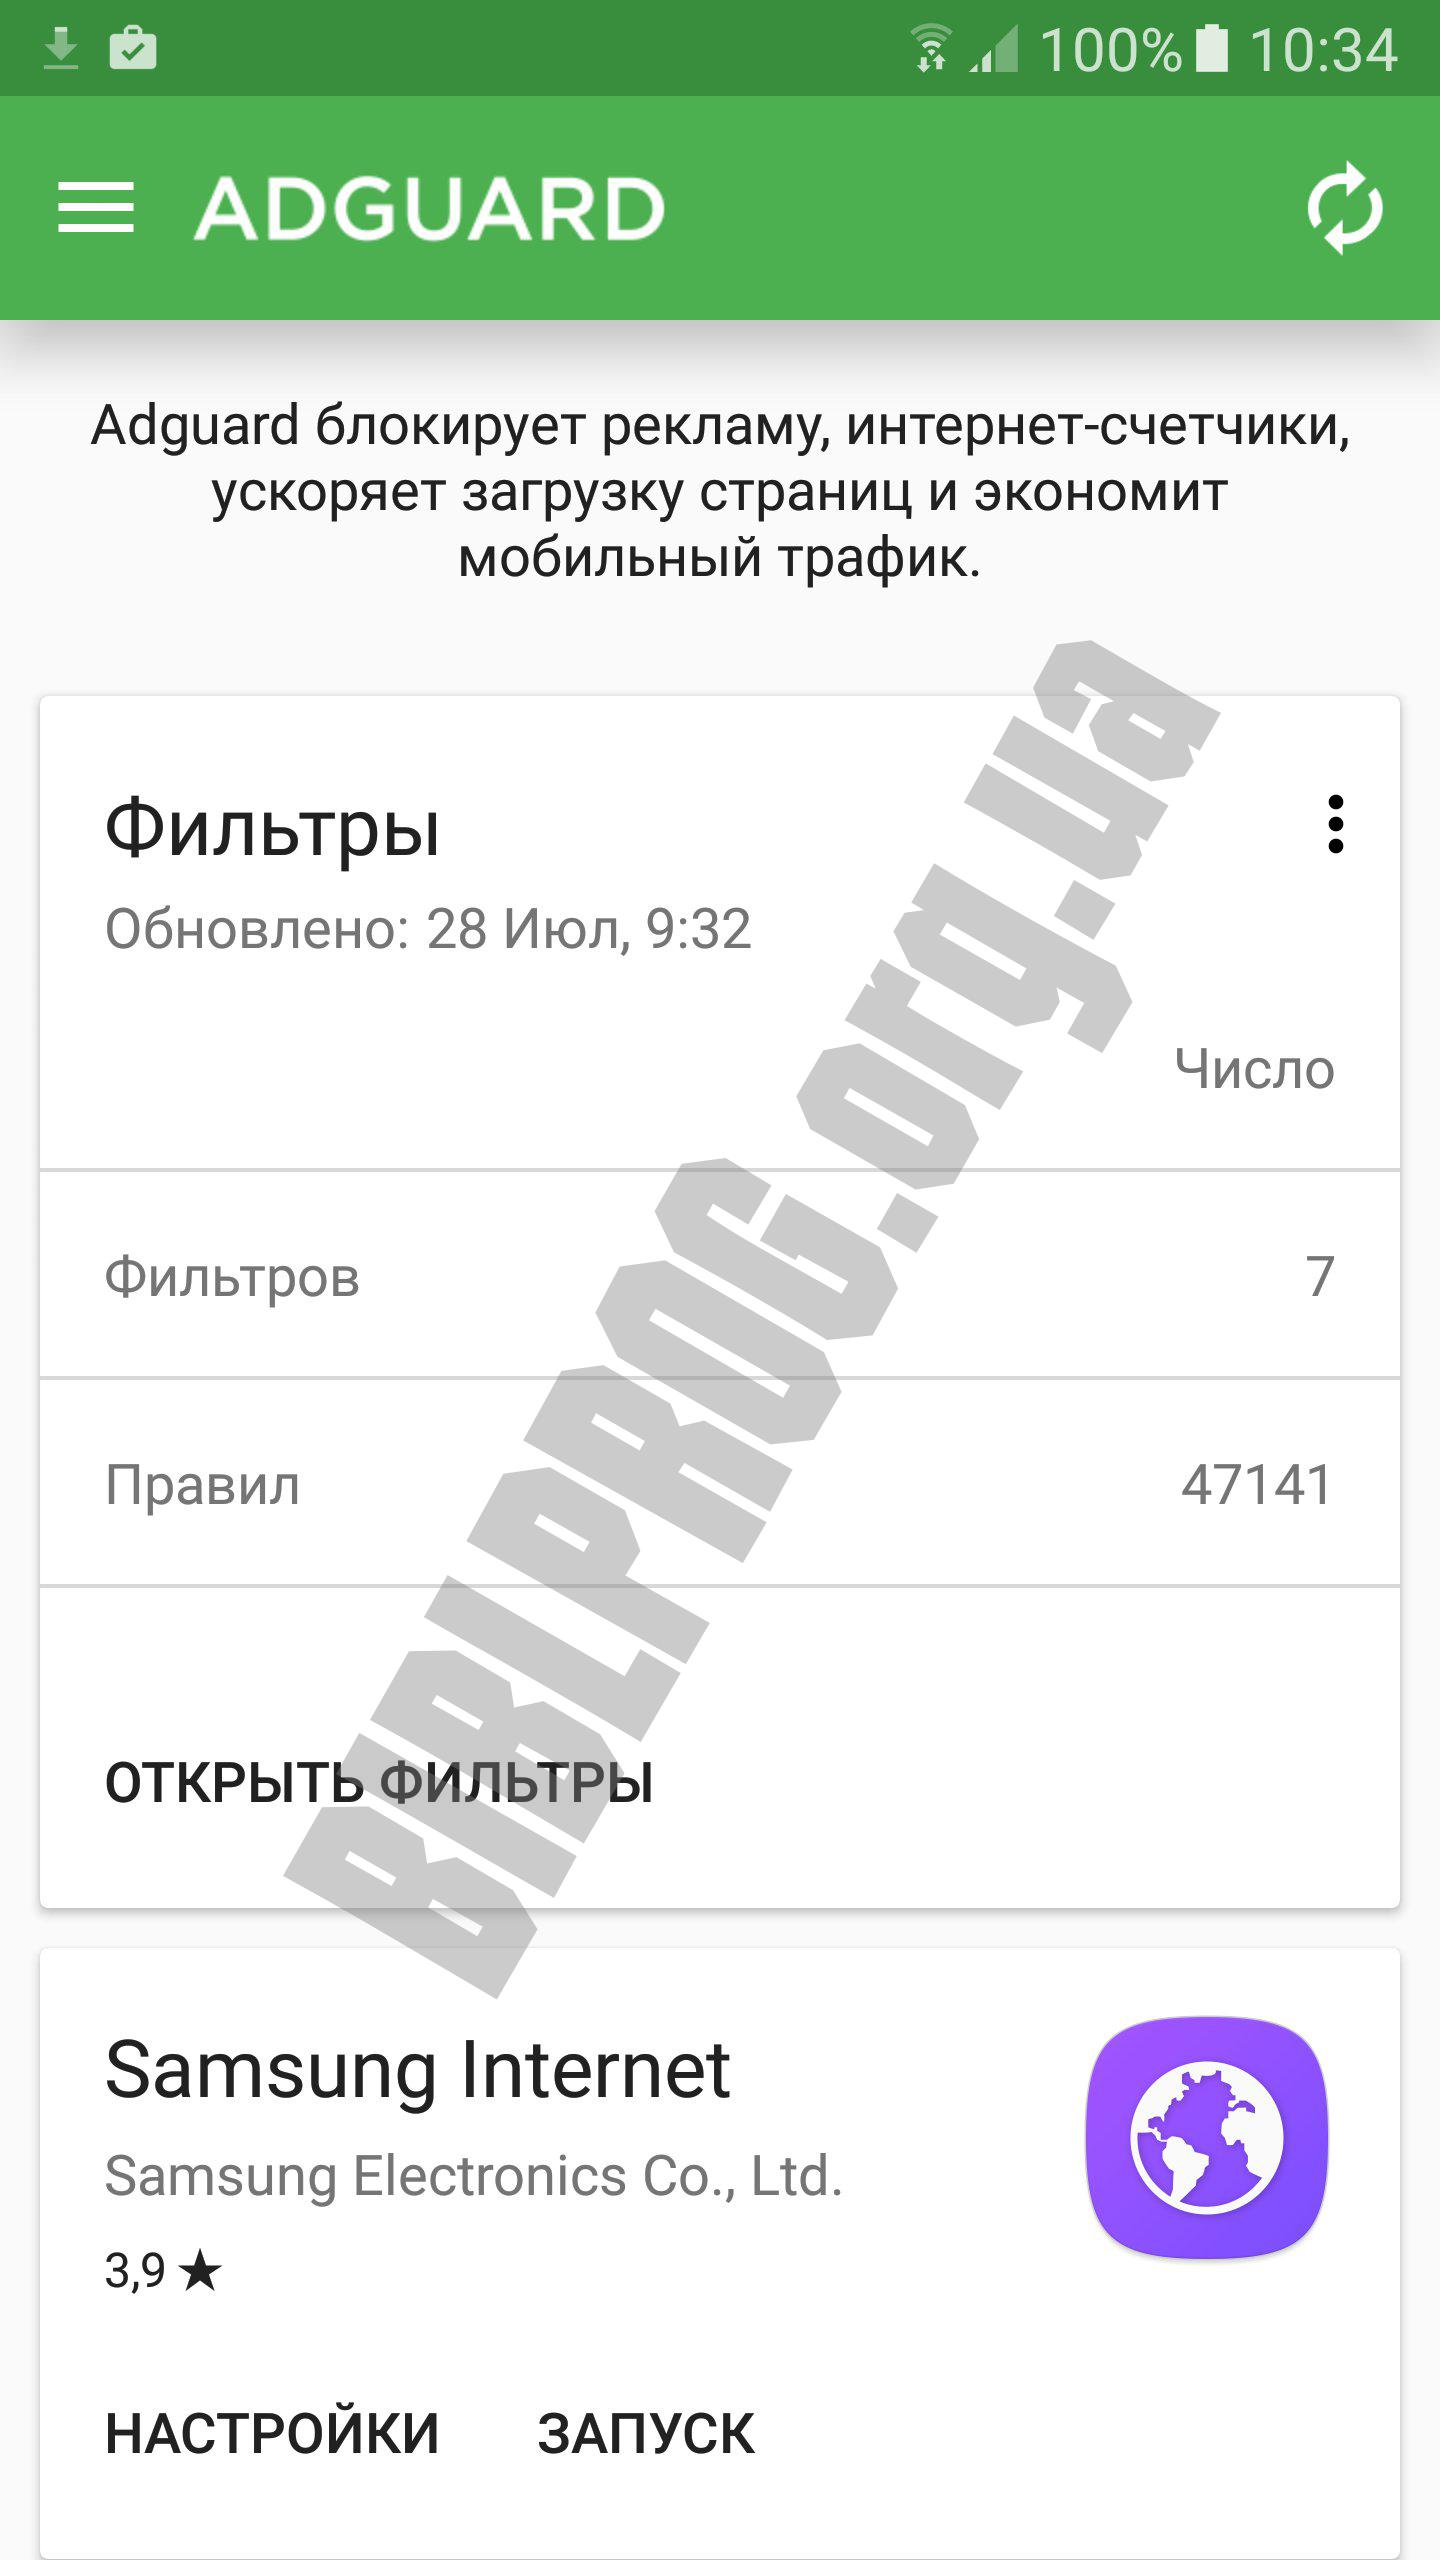 adguard for android by russian